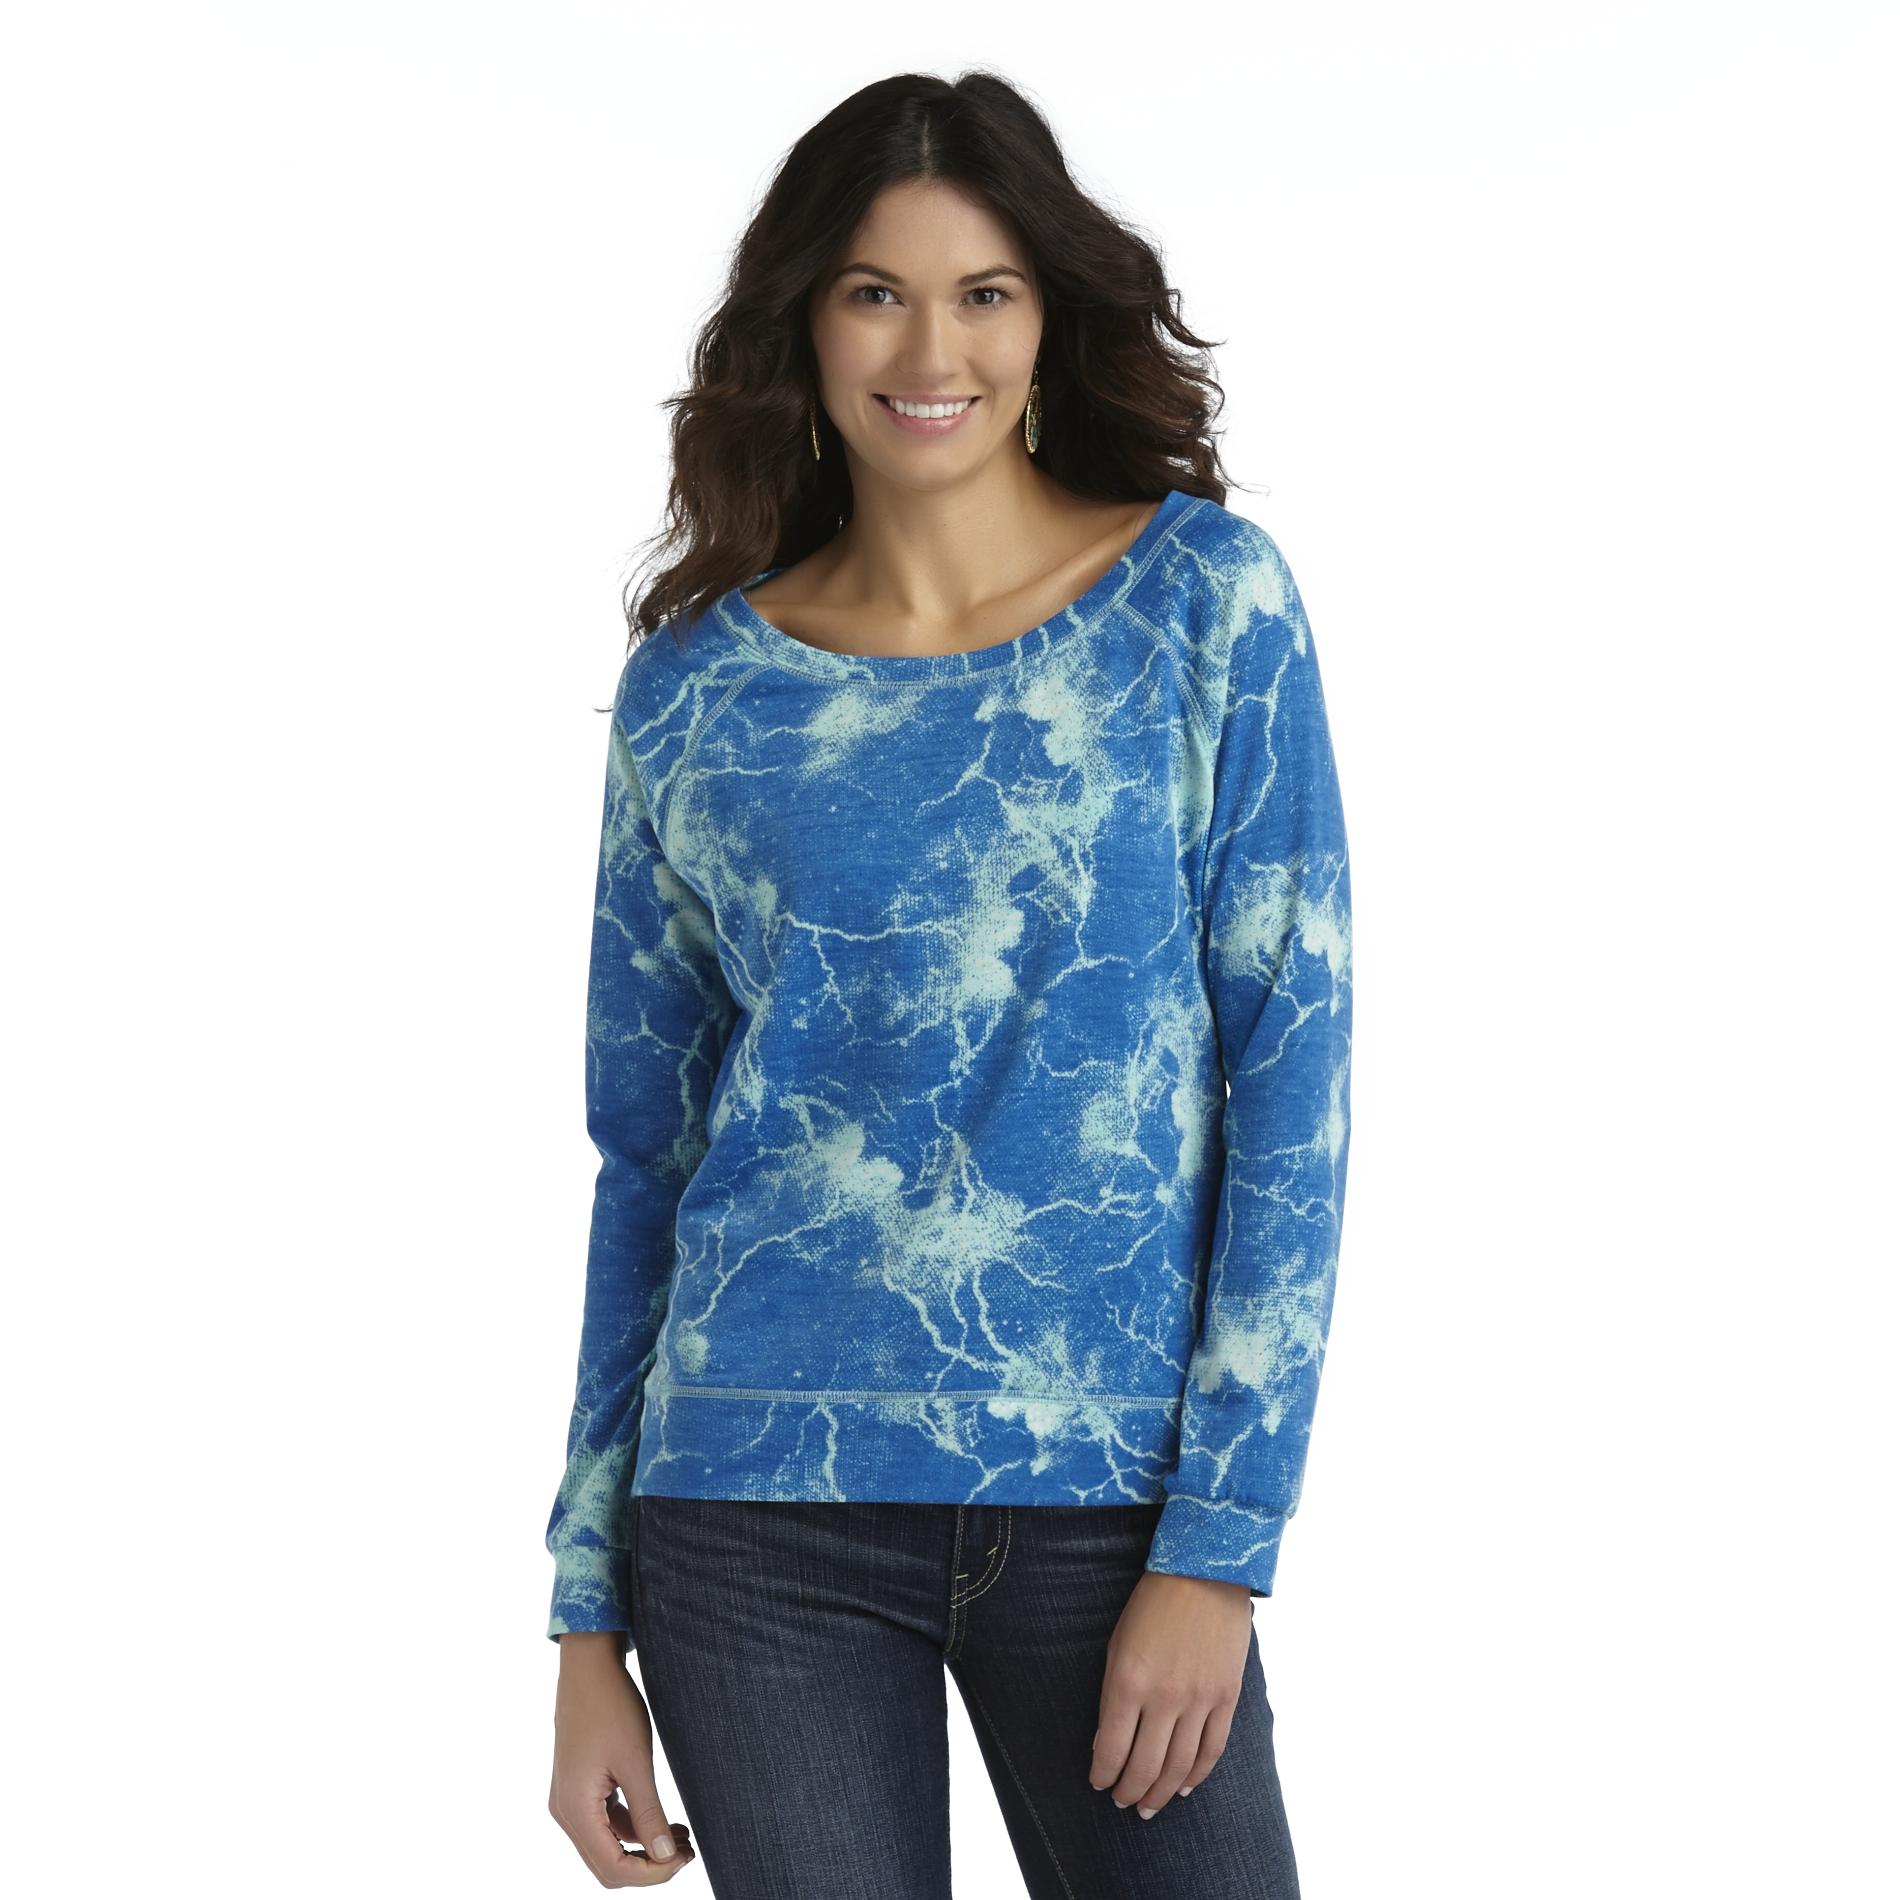 Route 66 Women's Long-Sleeve Top - Abstract Lightning